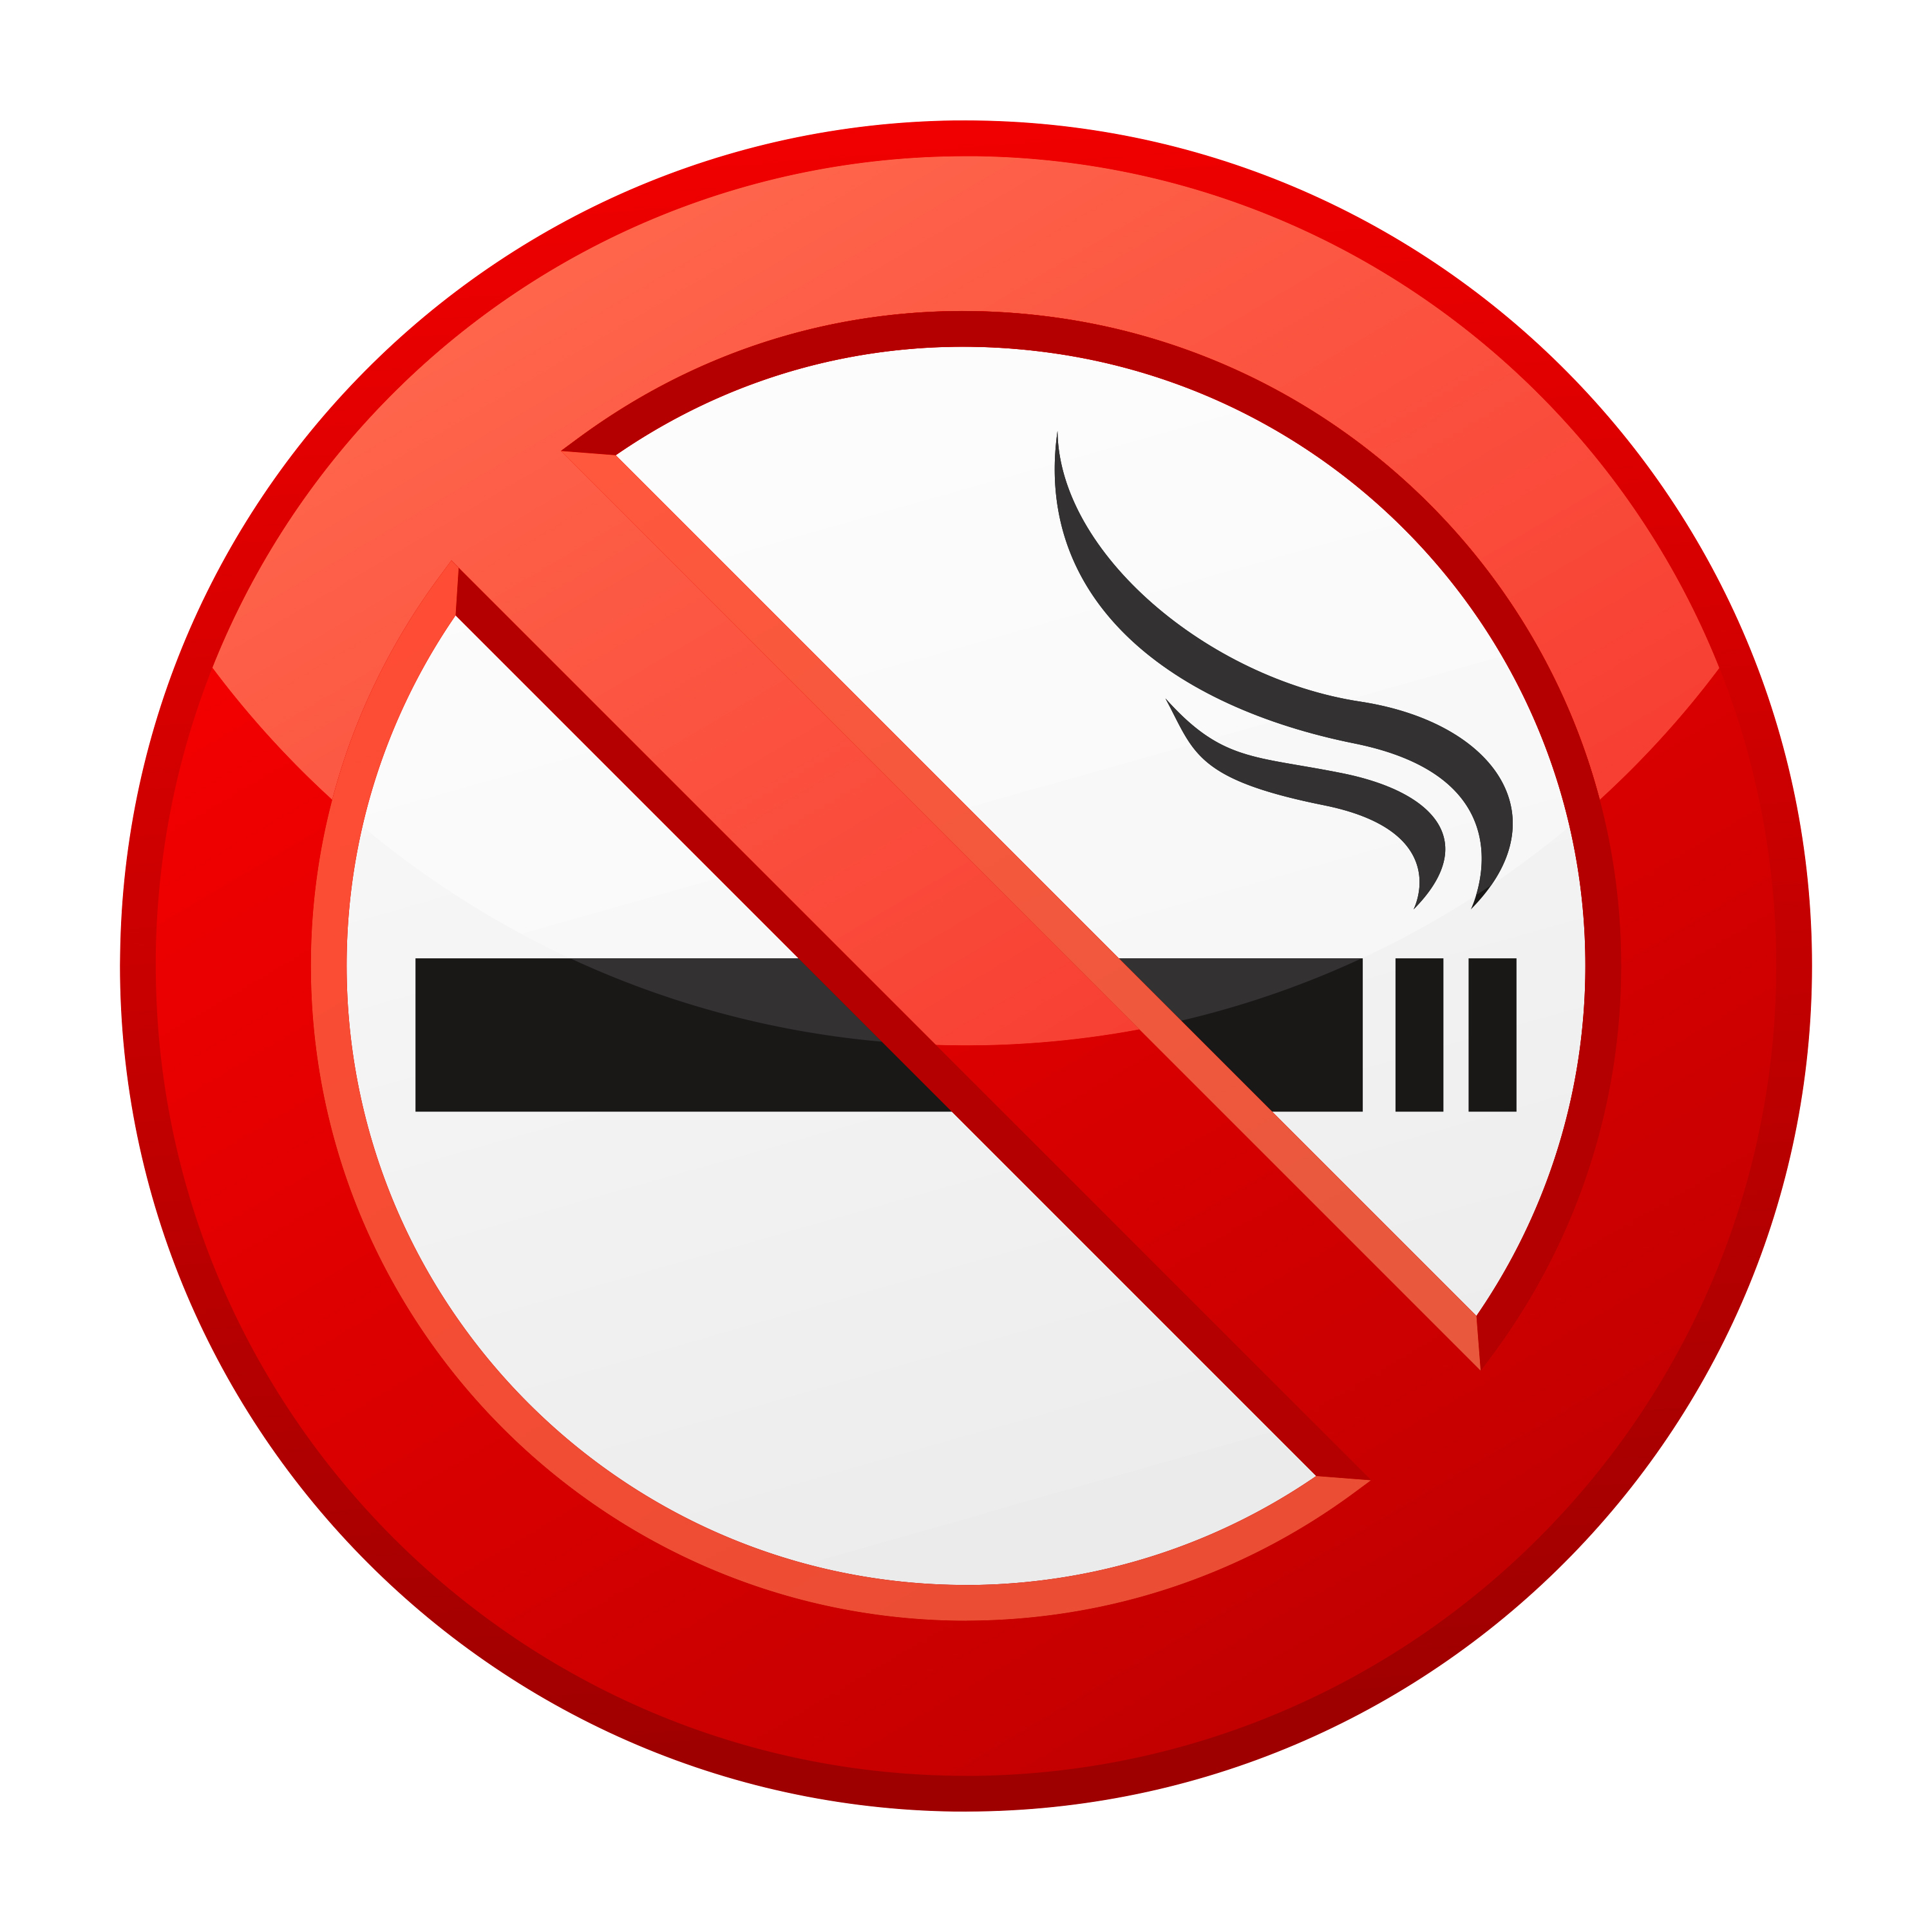 prevent smoking and drinking alcohol - Clip Art Library